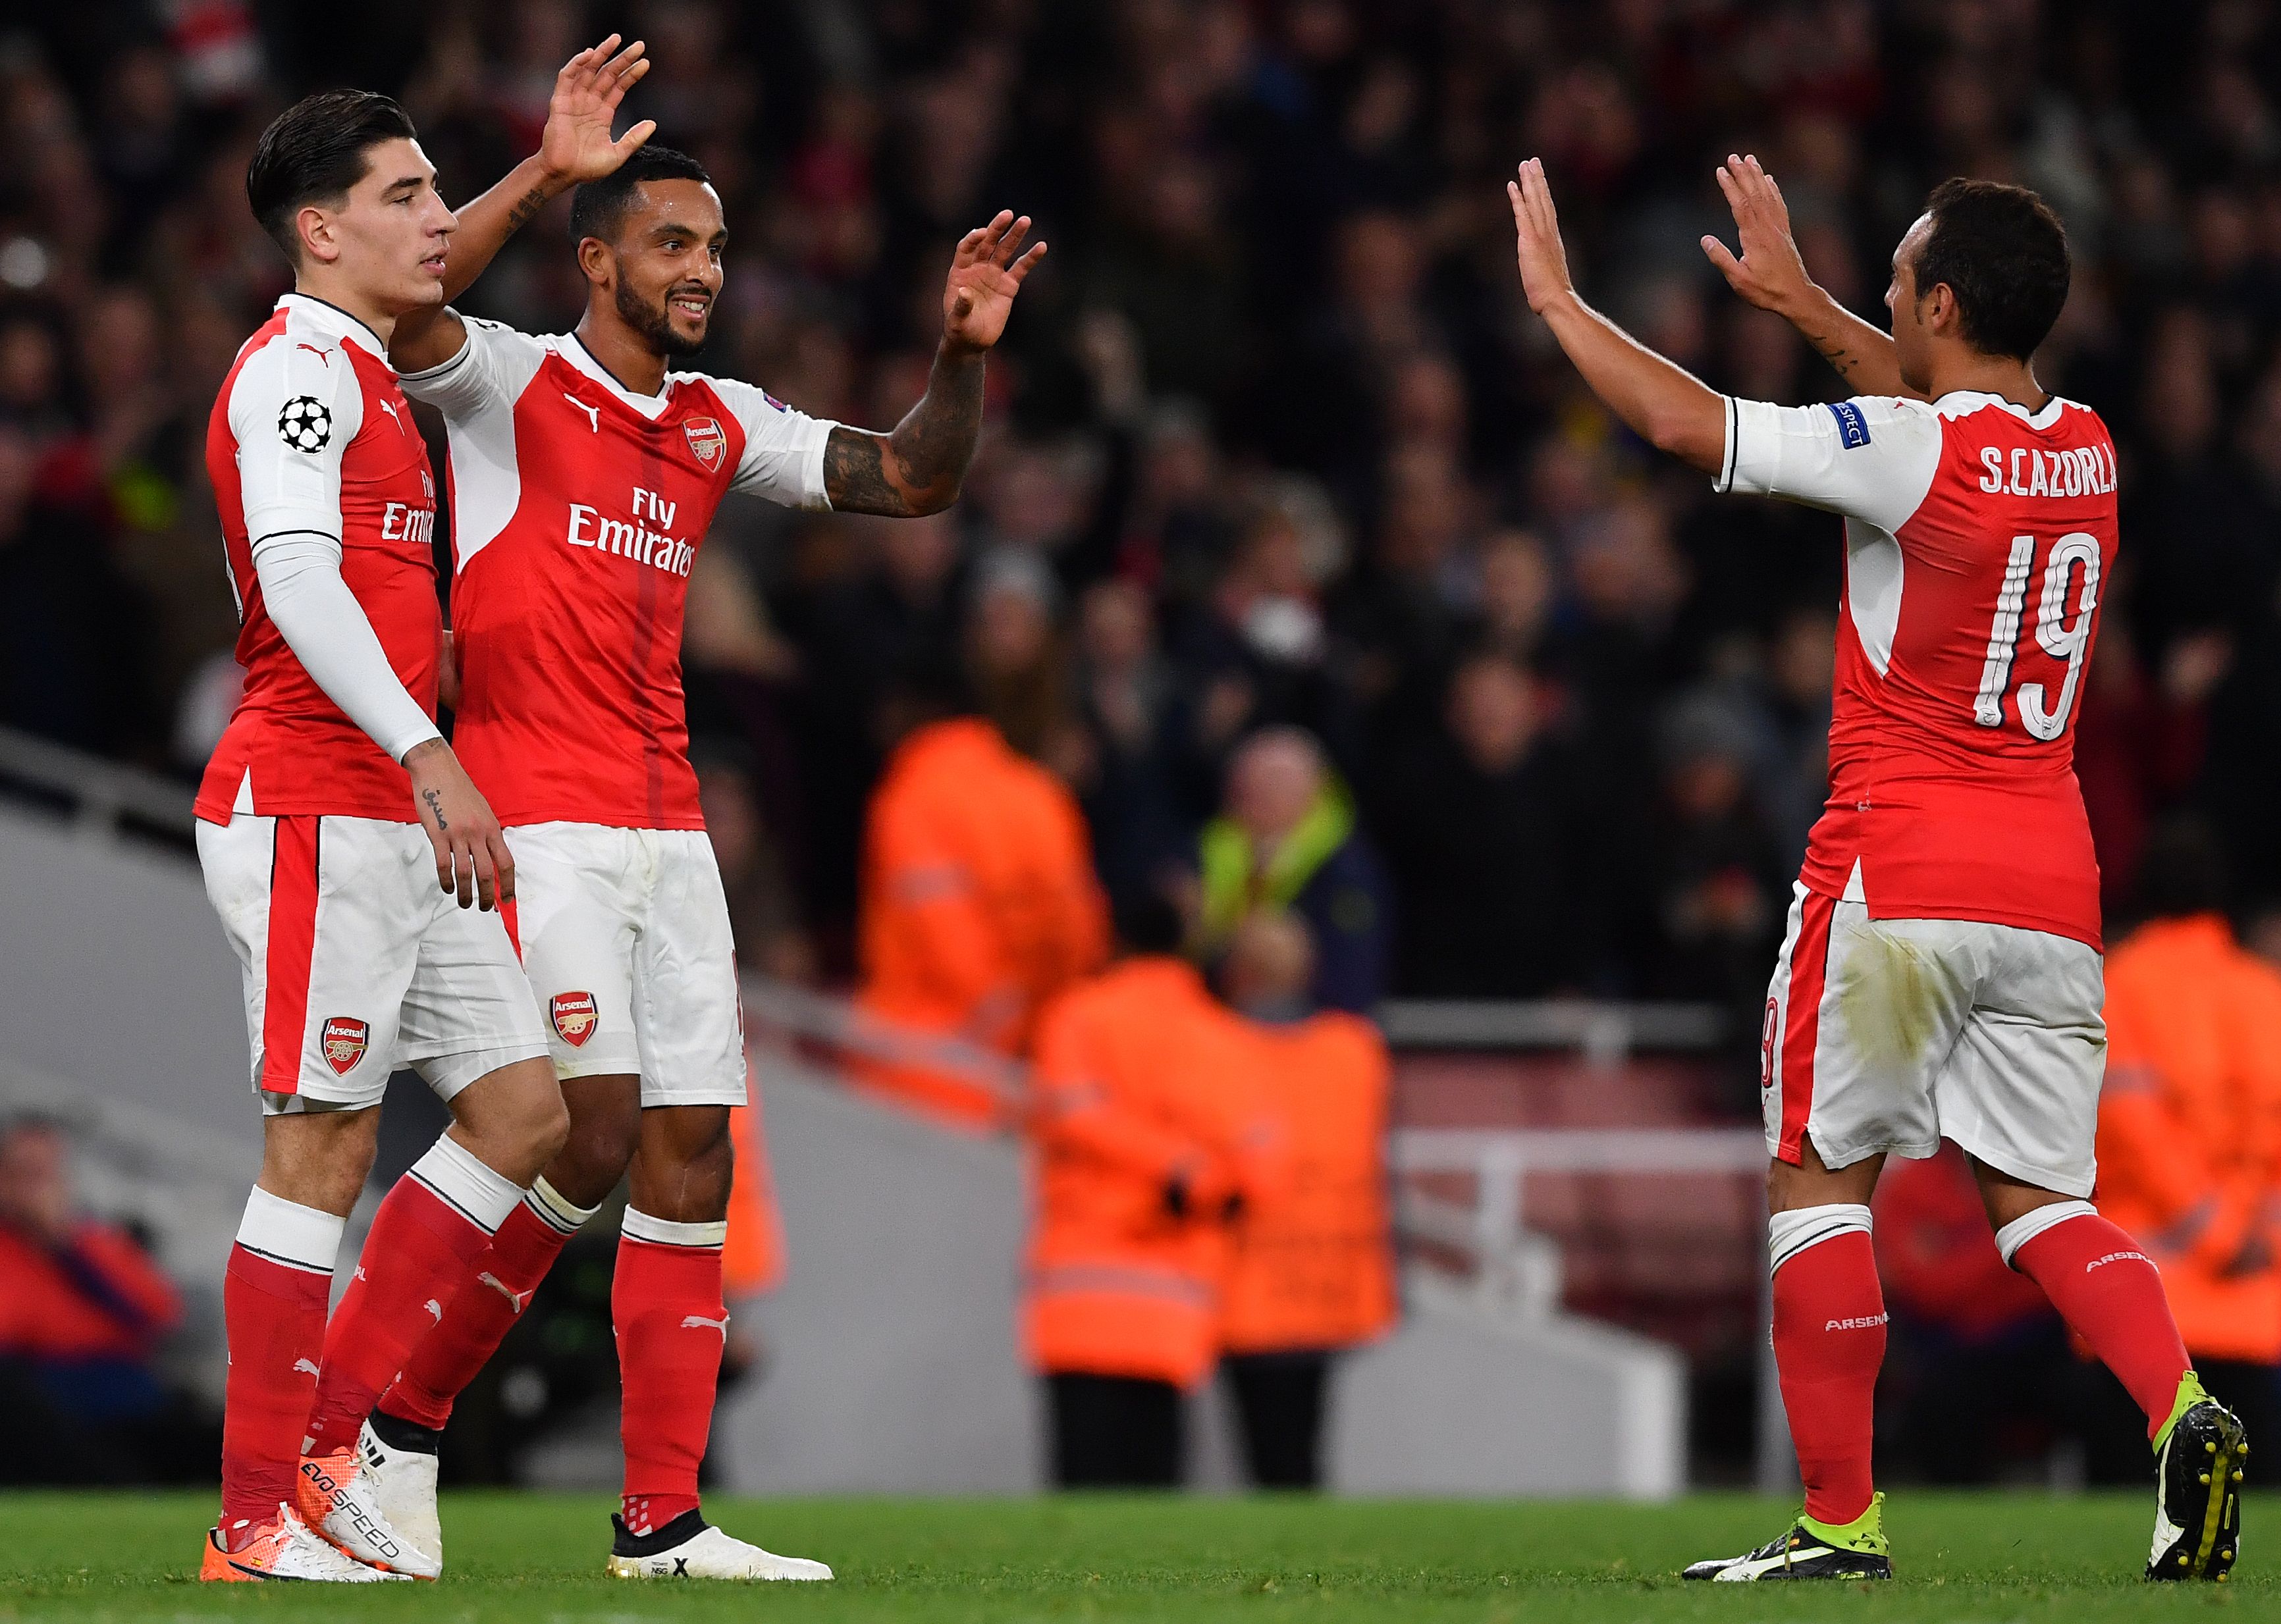 Arsenal's English midfielder Theo Walcott (C) celebrates scoring his team's second goal with Arsenal's Spanish defender Hector Bellerin (L) and Arsenal's Spanish midfielder Santi Cazorla during the UEFA Champions League Group A football match between Arsenal and Ludogorets Razgrad at The Emirates Stadium in London on October 19, 2016. (Photo by Ben Stansall/AFP/Getty Images)